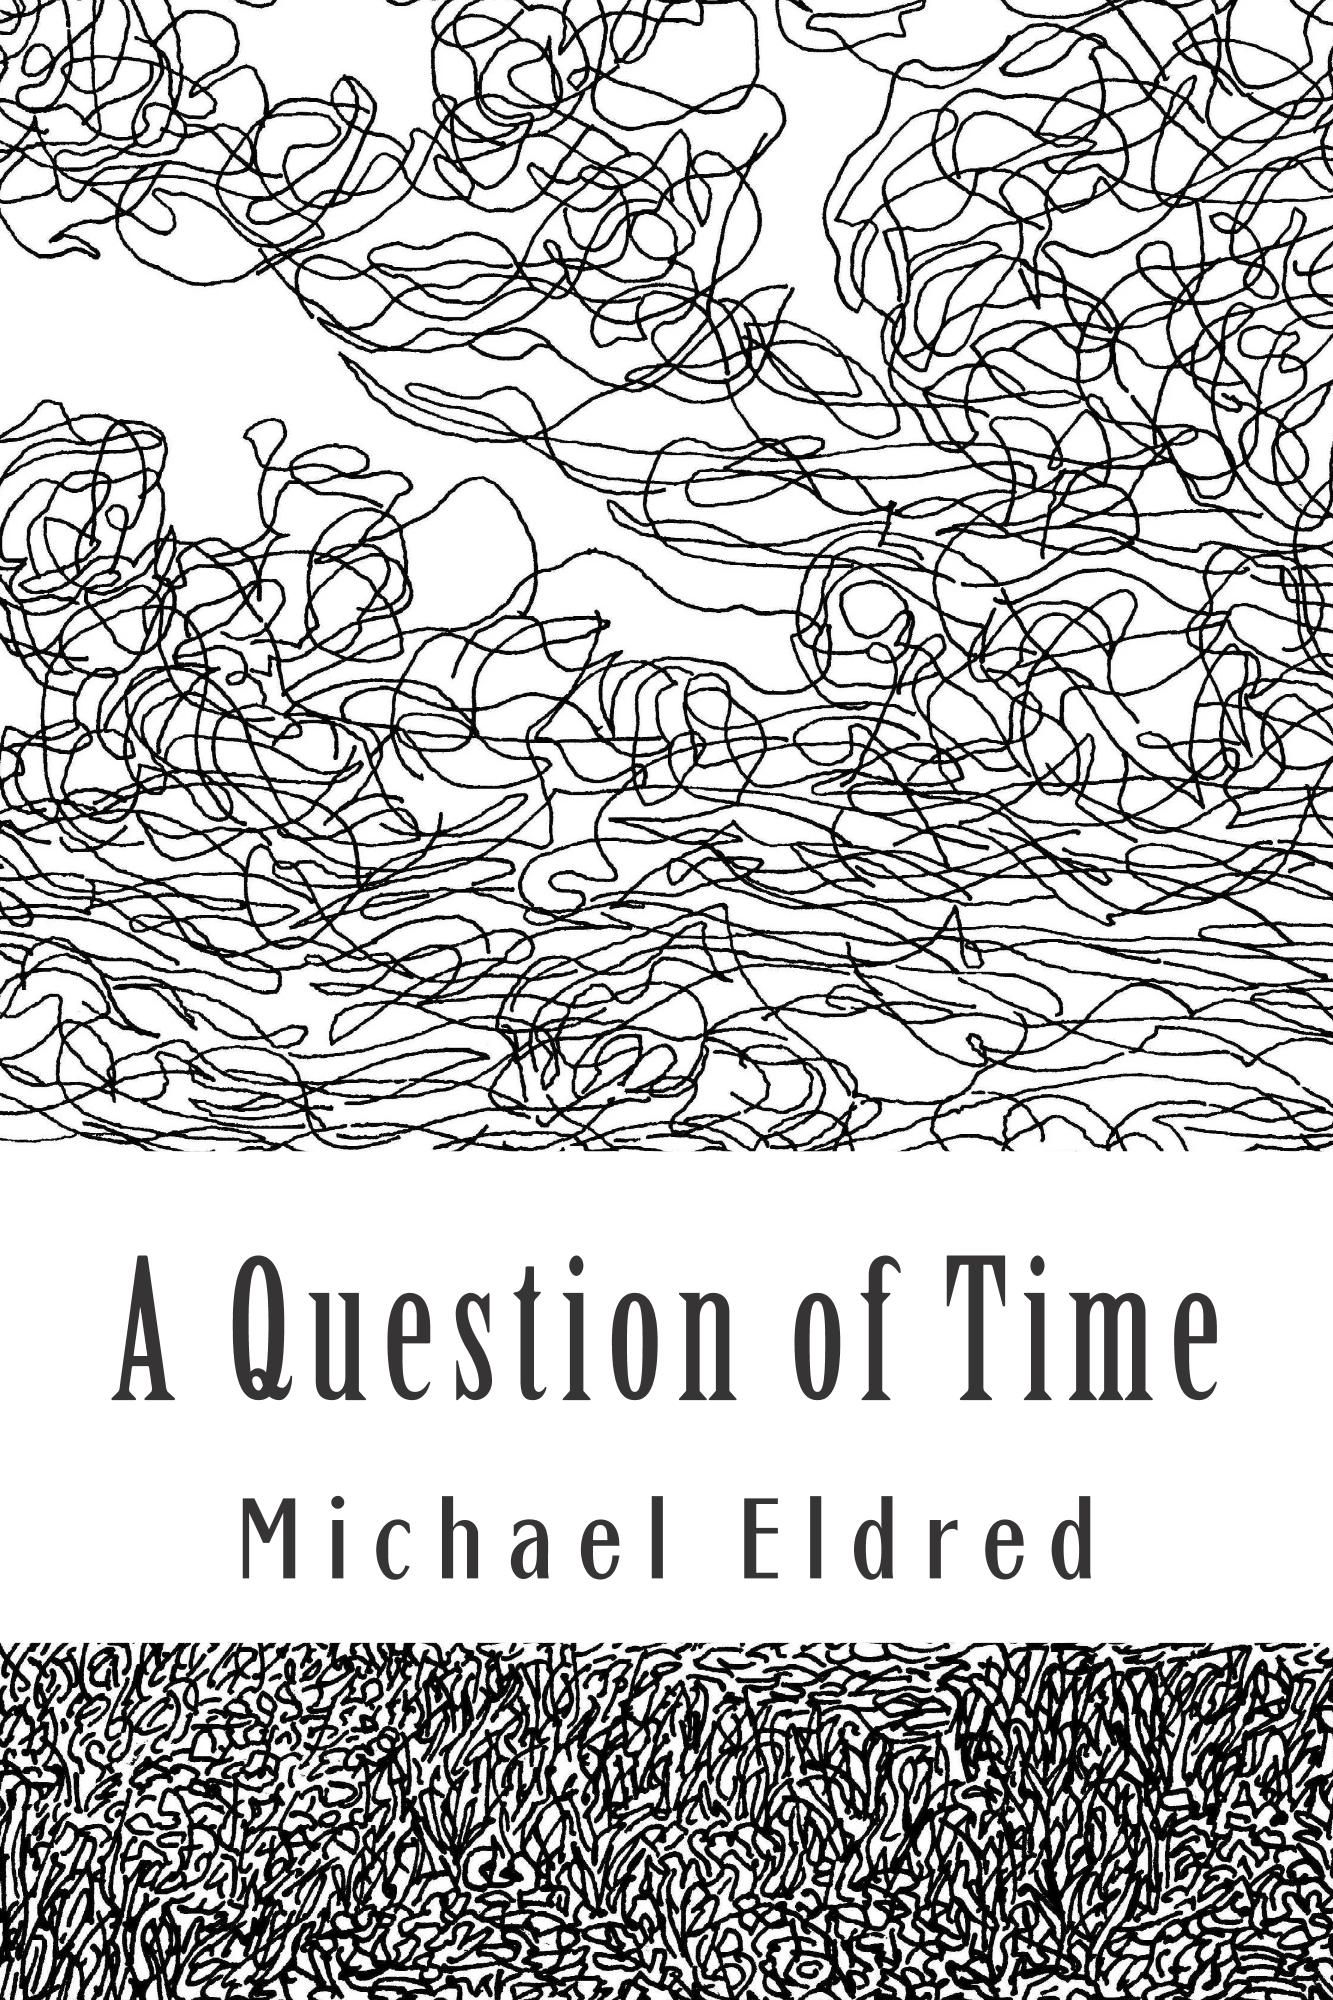 e-book cover: Question of Time at Amazon.com